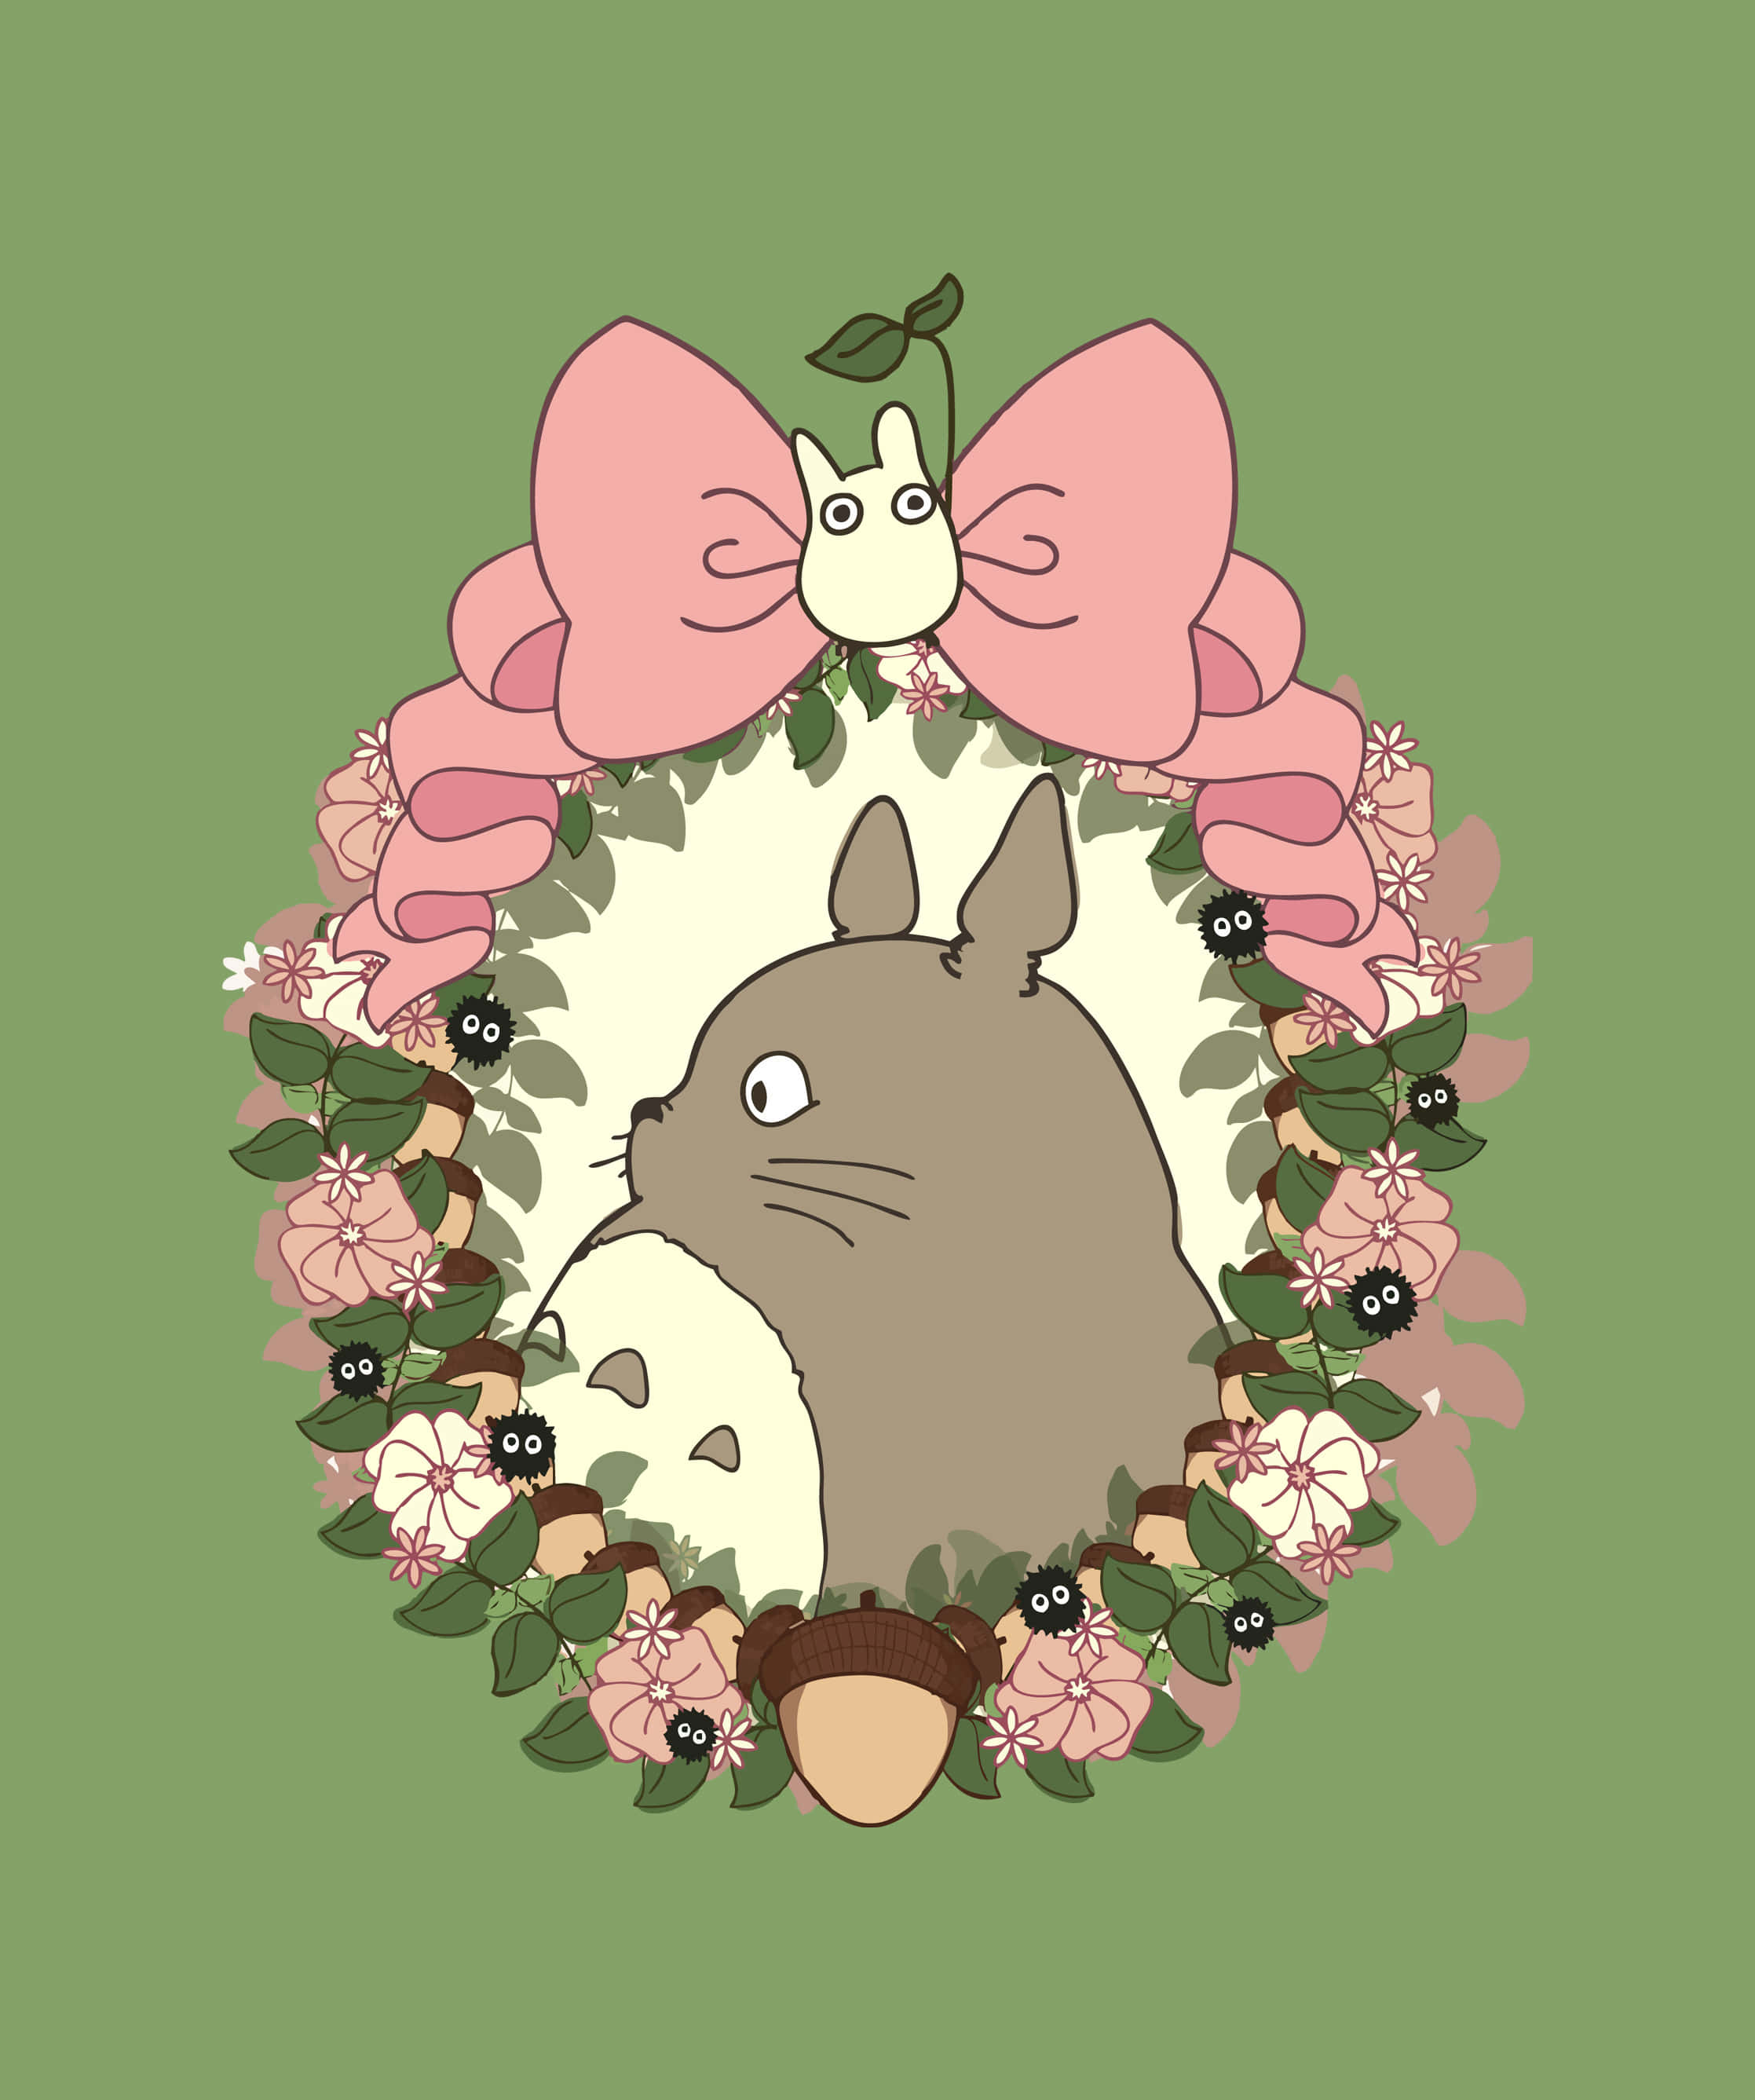 Totoro, the beloved forest spirit from the popular Studio Ghibli classic